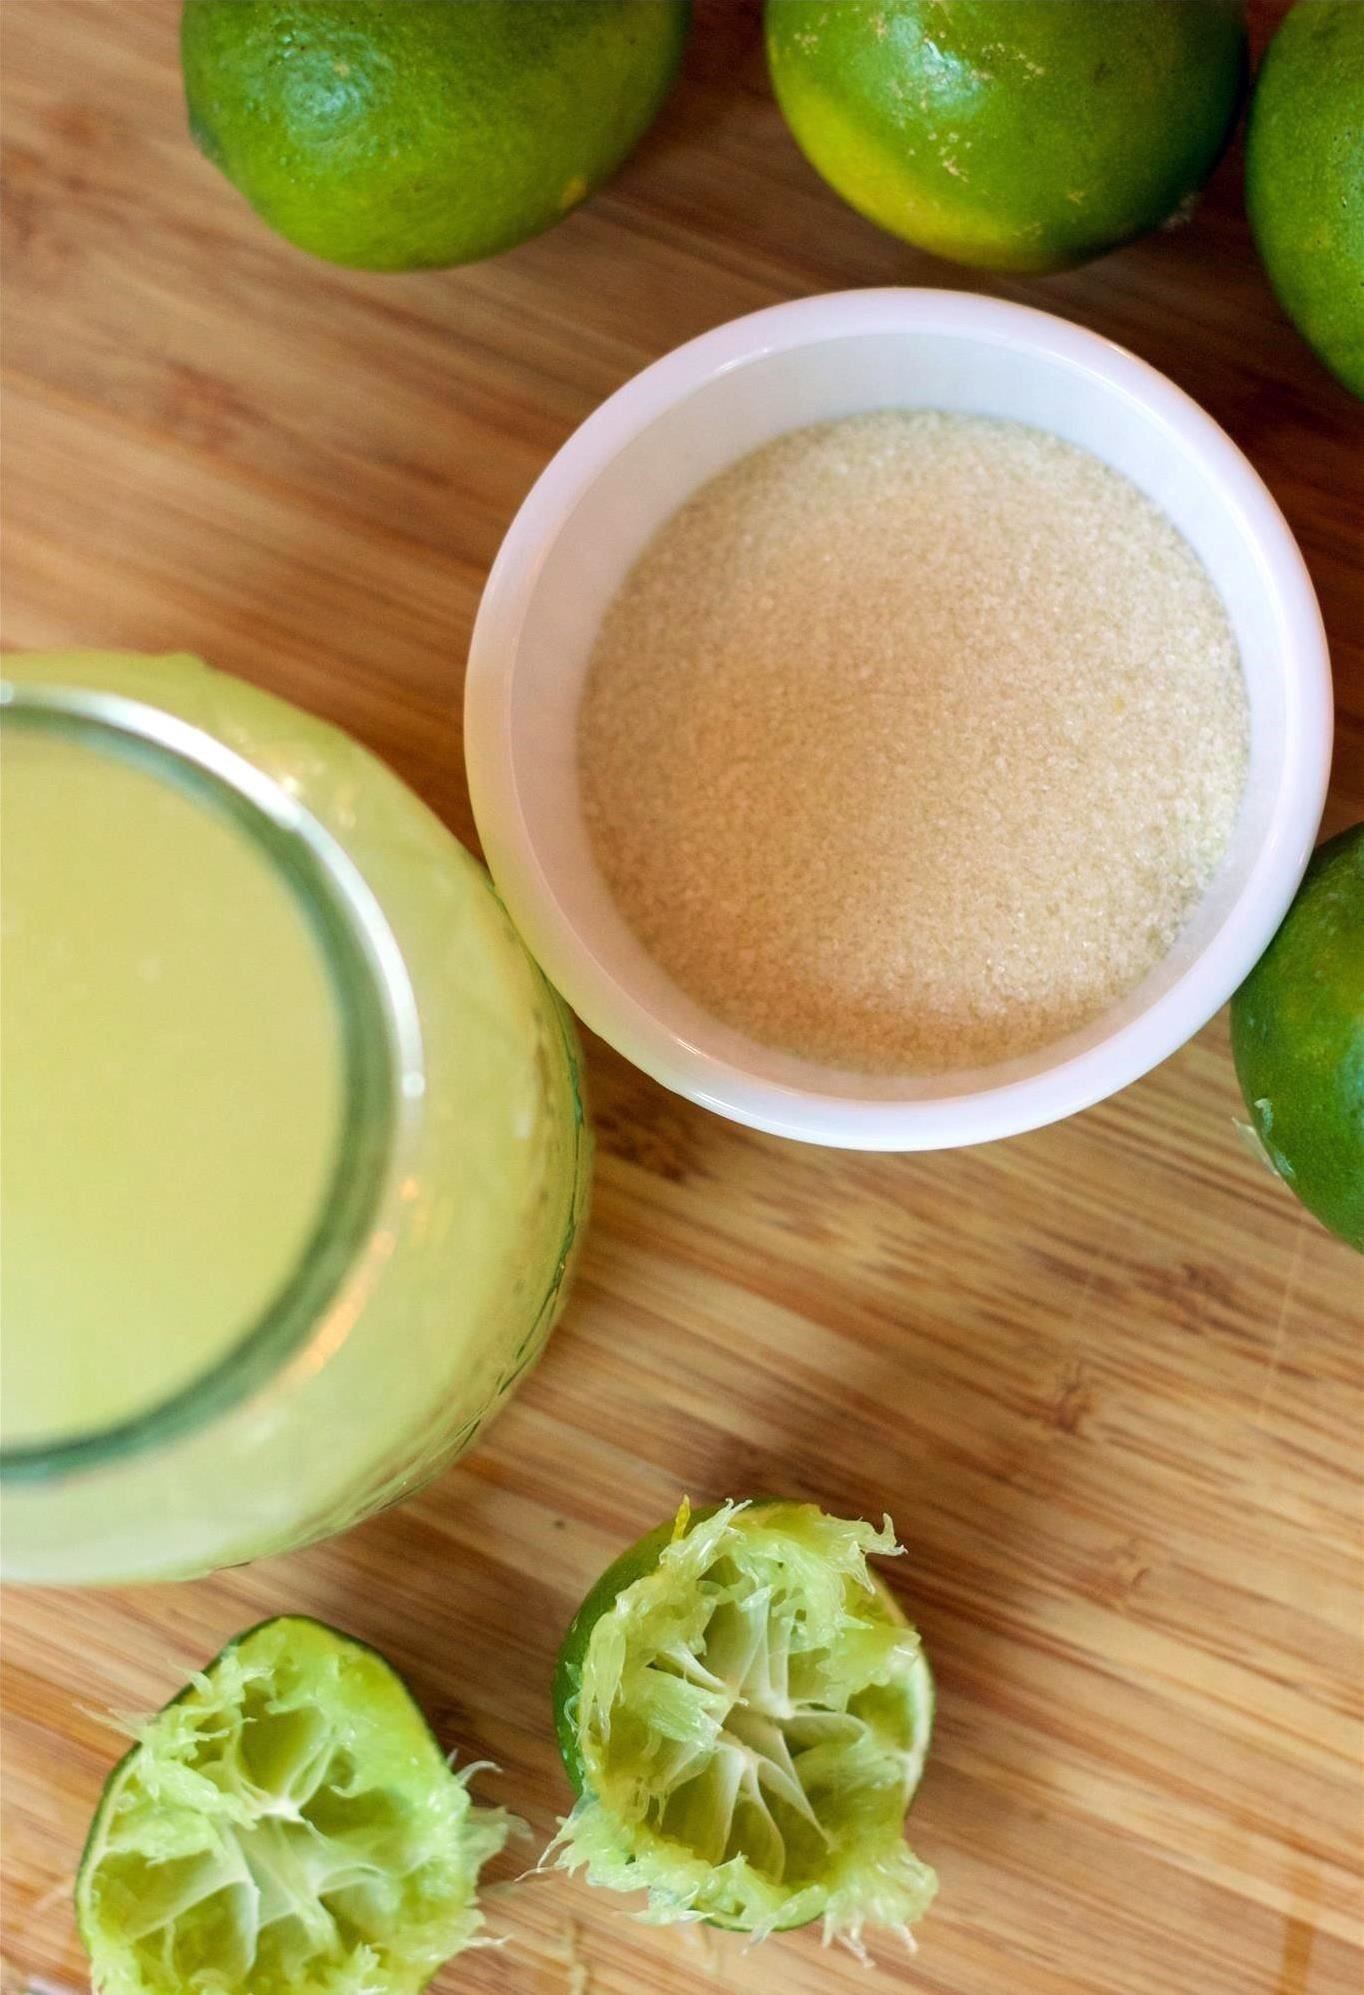 Save Money & Make Better Margaritas by Ditching the Store-Bought Mix